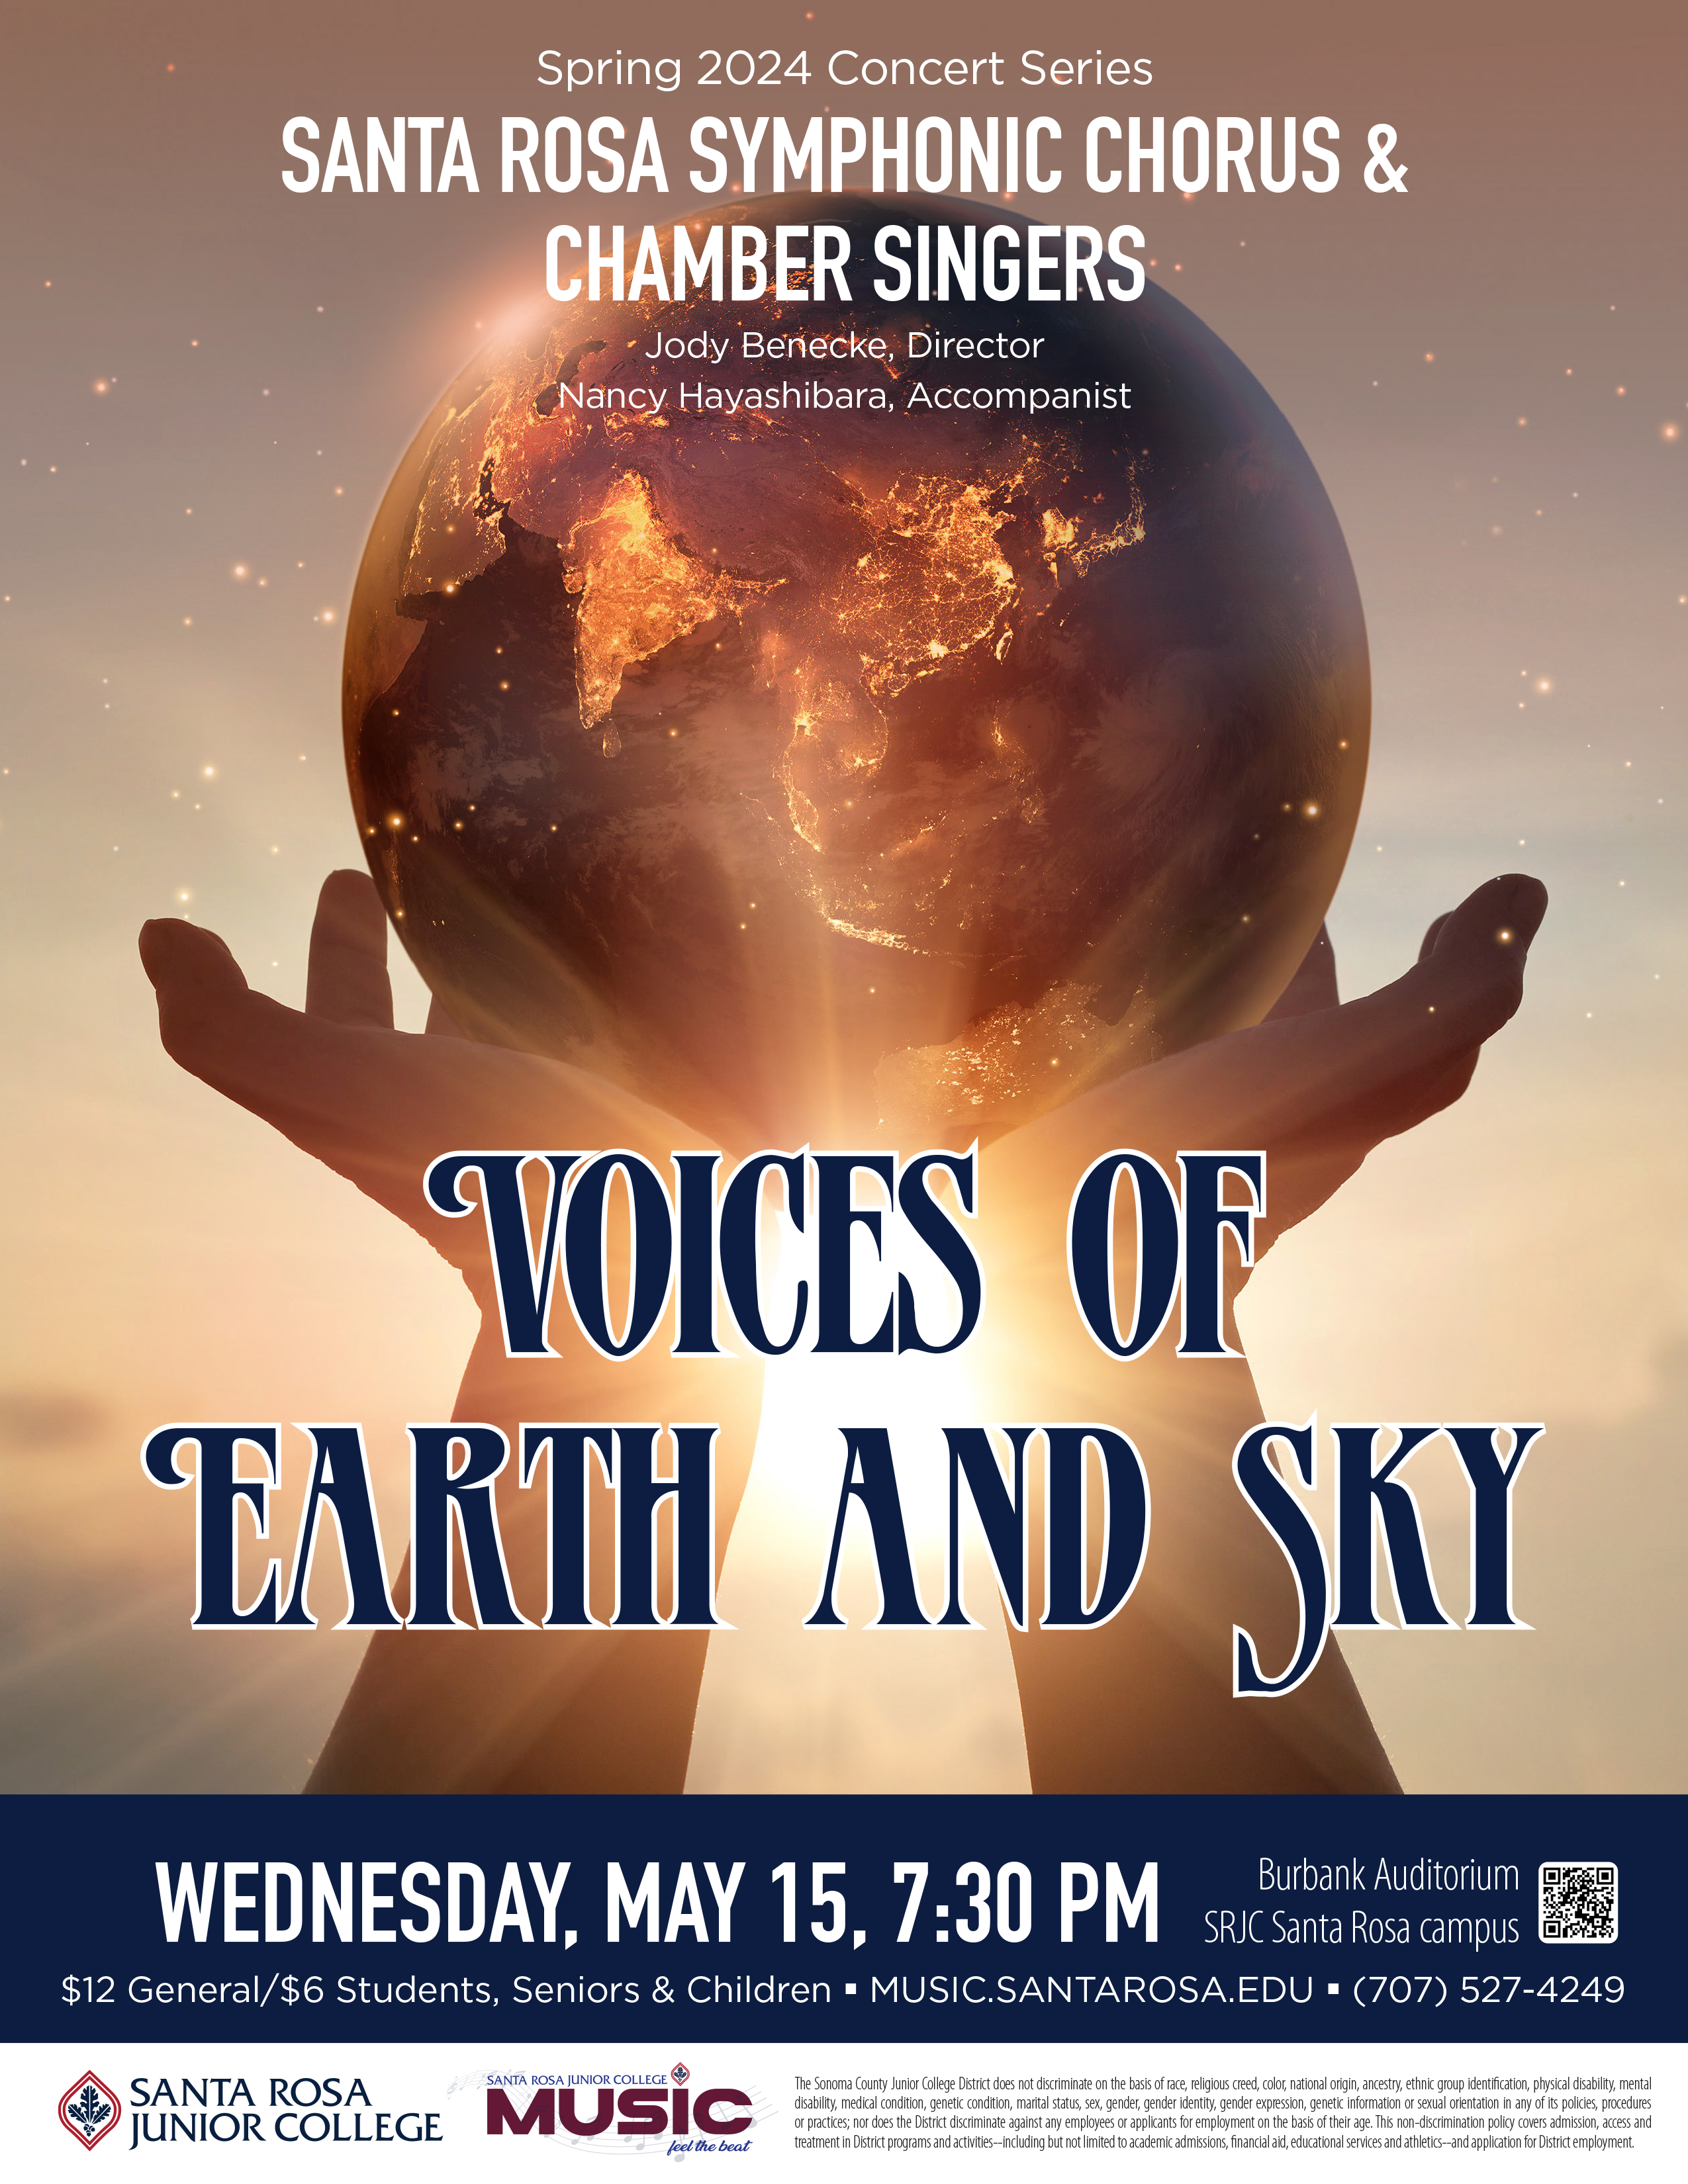 “Voices of Earth & Sky” on May 15th: Please join the Santa Rosa Symphonic Chorus and SRJC Chamber Singers in Burbank Auditorium on Wednesday, May 15th at 7:30 pm as we present choral music reflecting the title theme “Voices of Earth & Sky”.  Featured on the program will be works by two of our own SRJC Music colleagues:  “Music, Do Not Cease,” an affecting setting of a classic poetic text, by Mark Alun Anderman, and a unique trilogy of songs by Nancy Hayashibara that explores lyrical communication through both sound and gesture.  Jody Benecke, director and Nancy Hayashibara, piano.